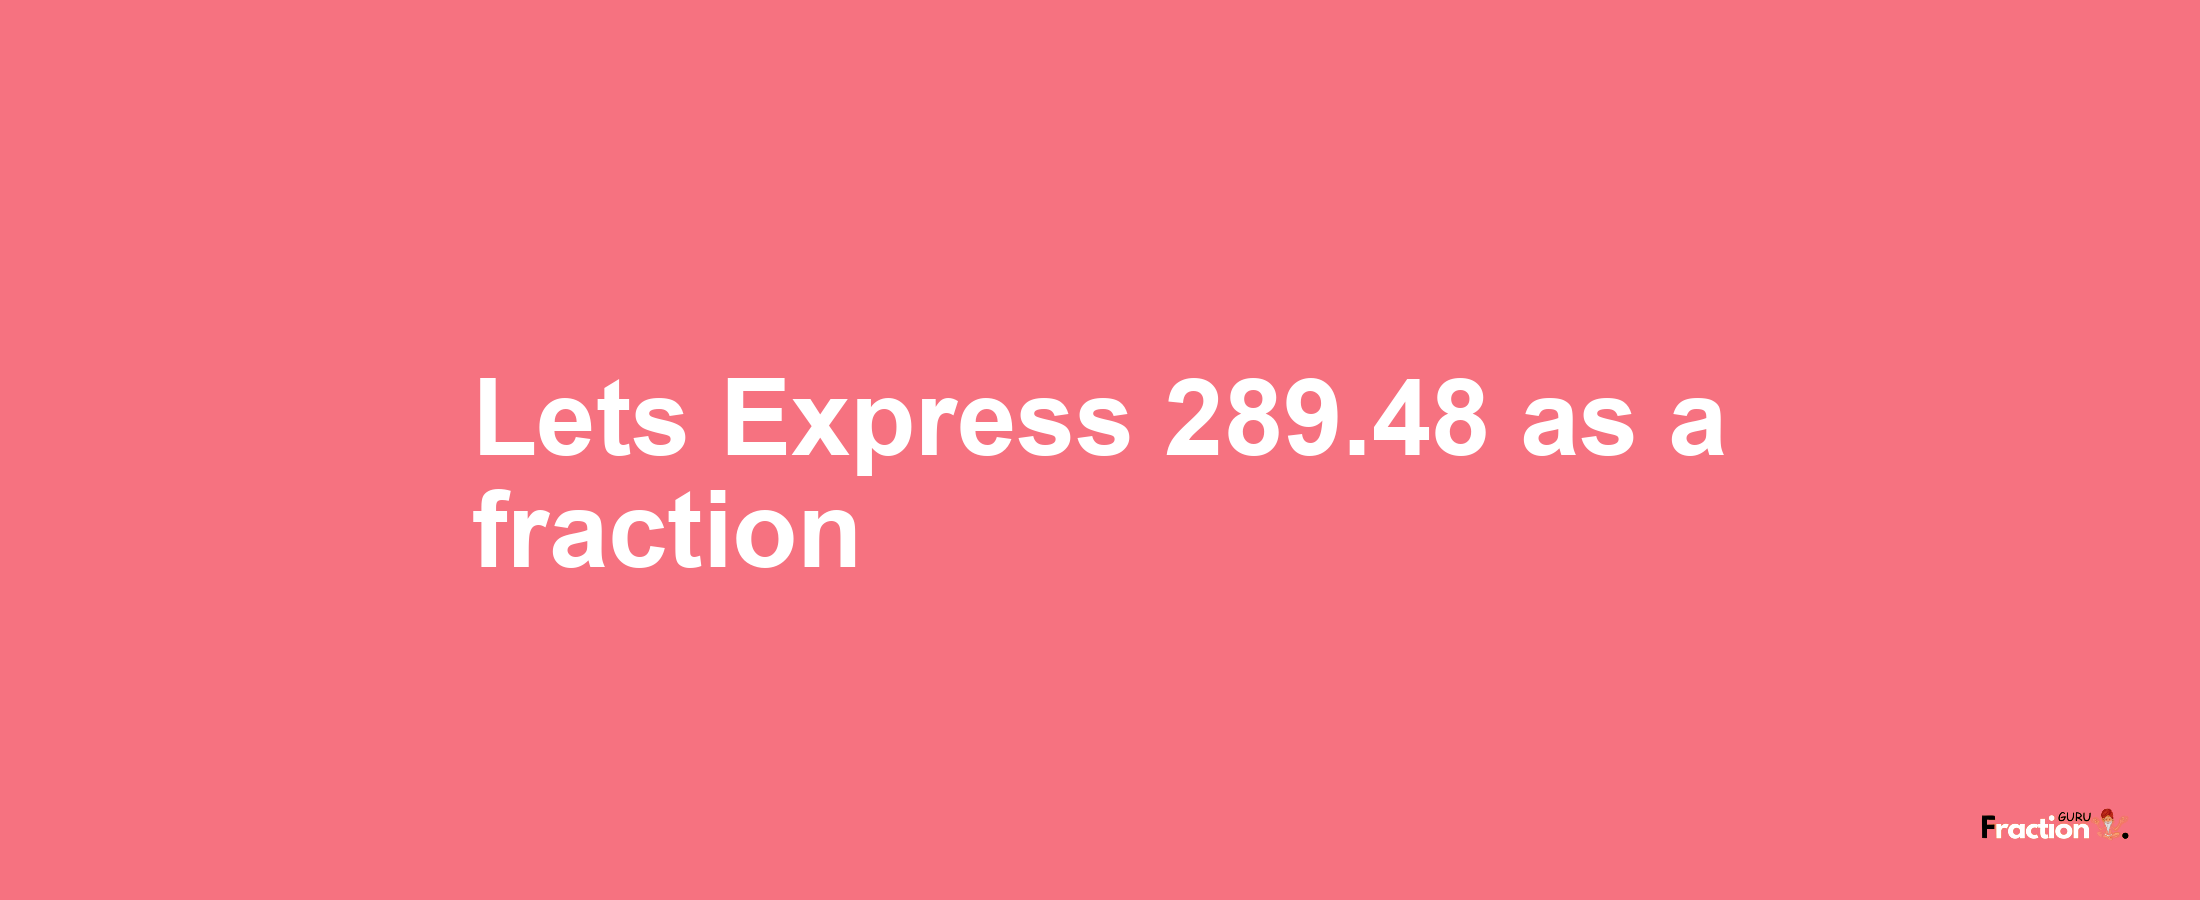 Lets Express 289.48 as afraction